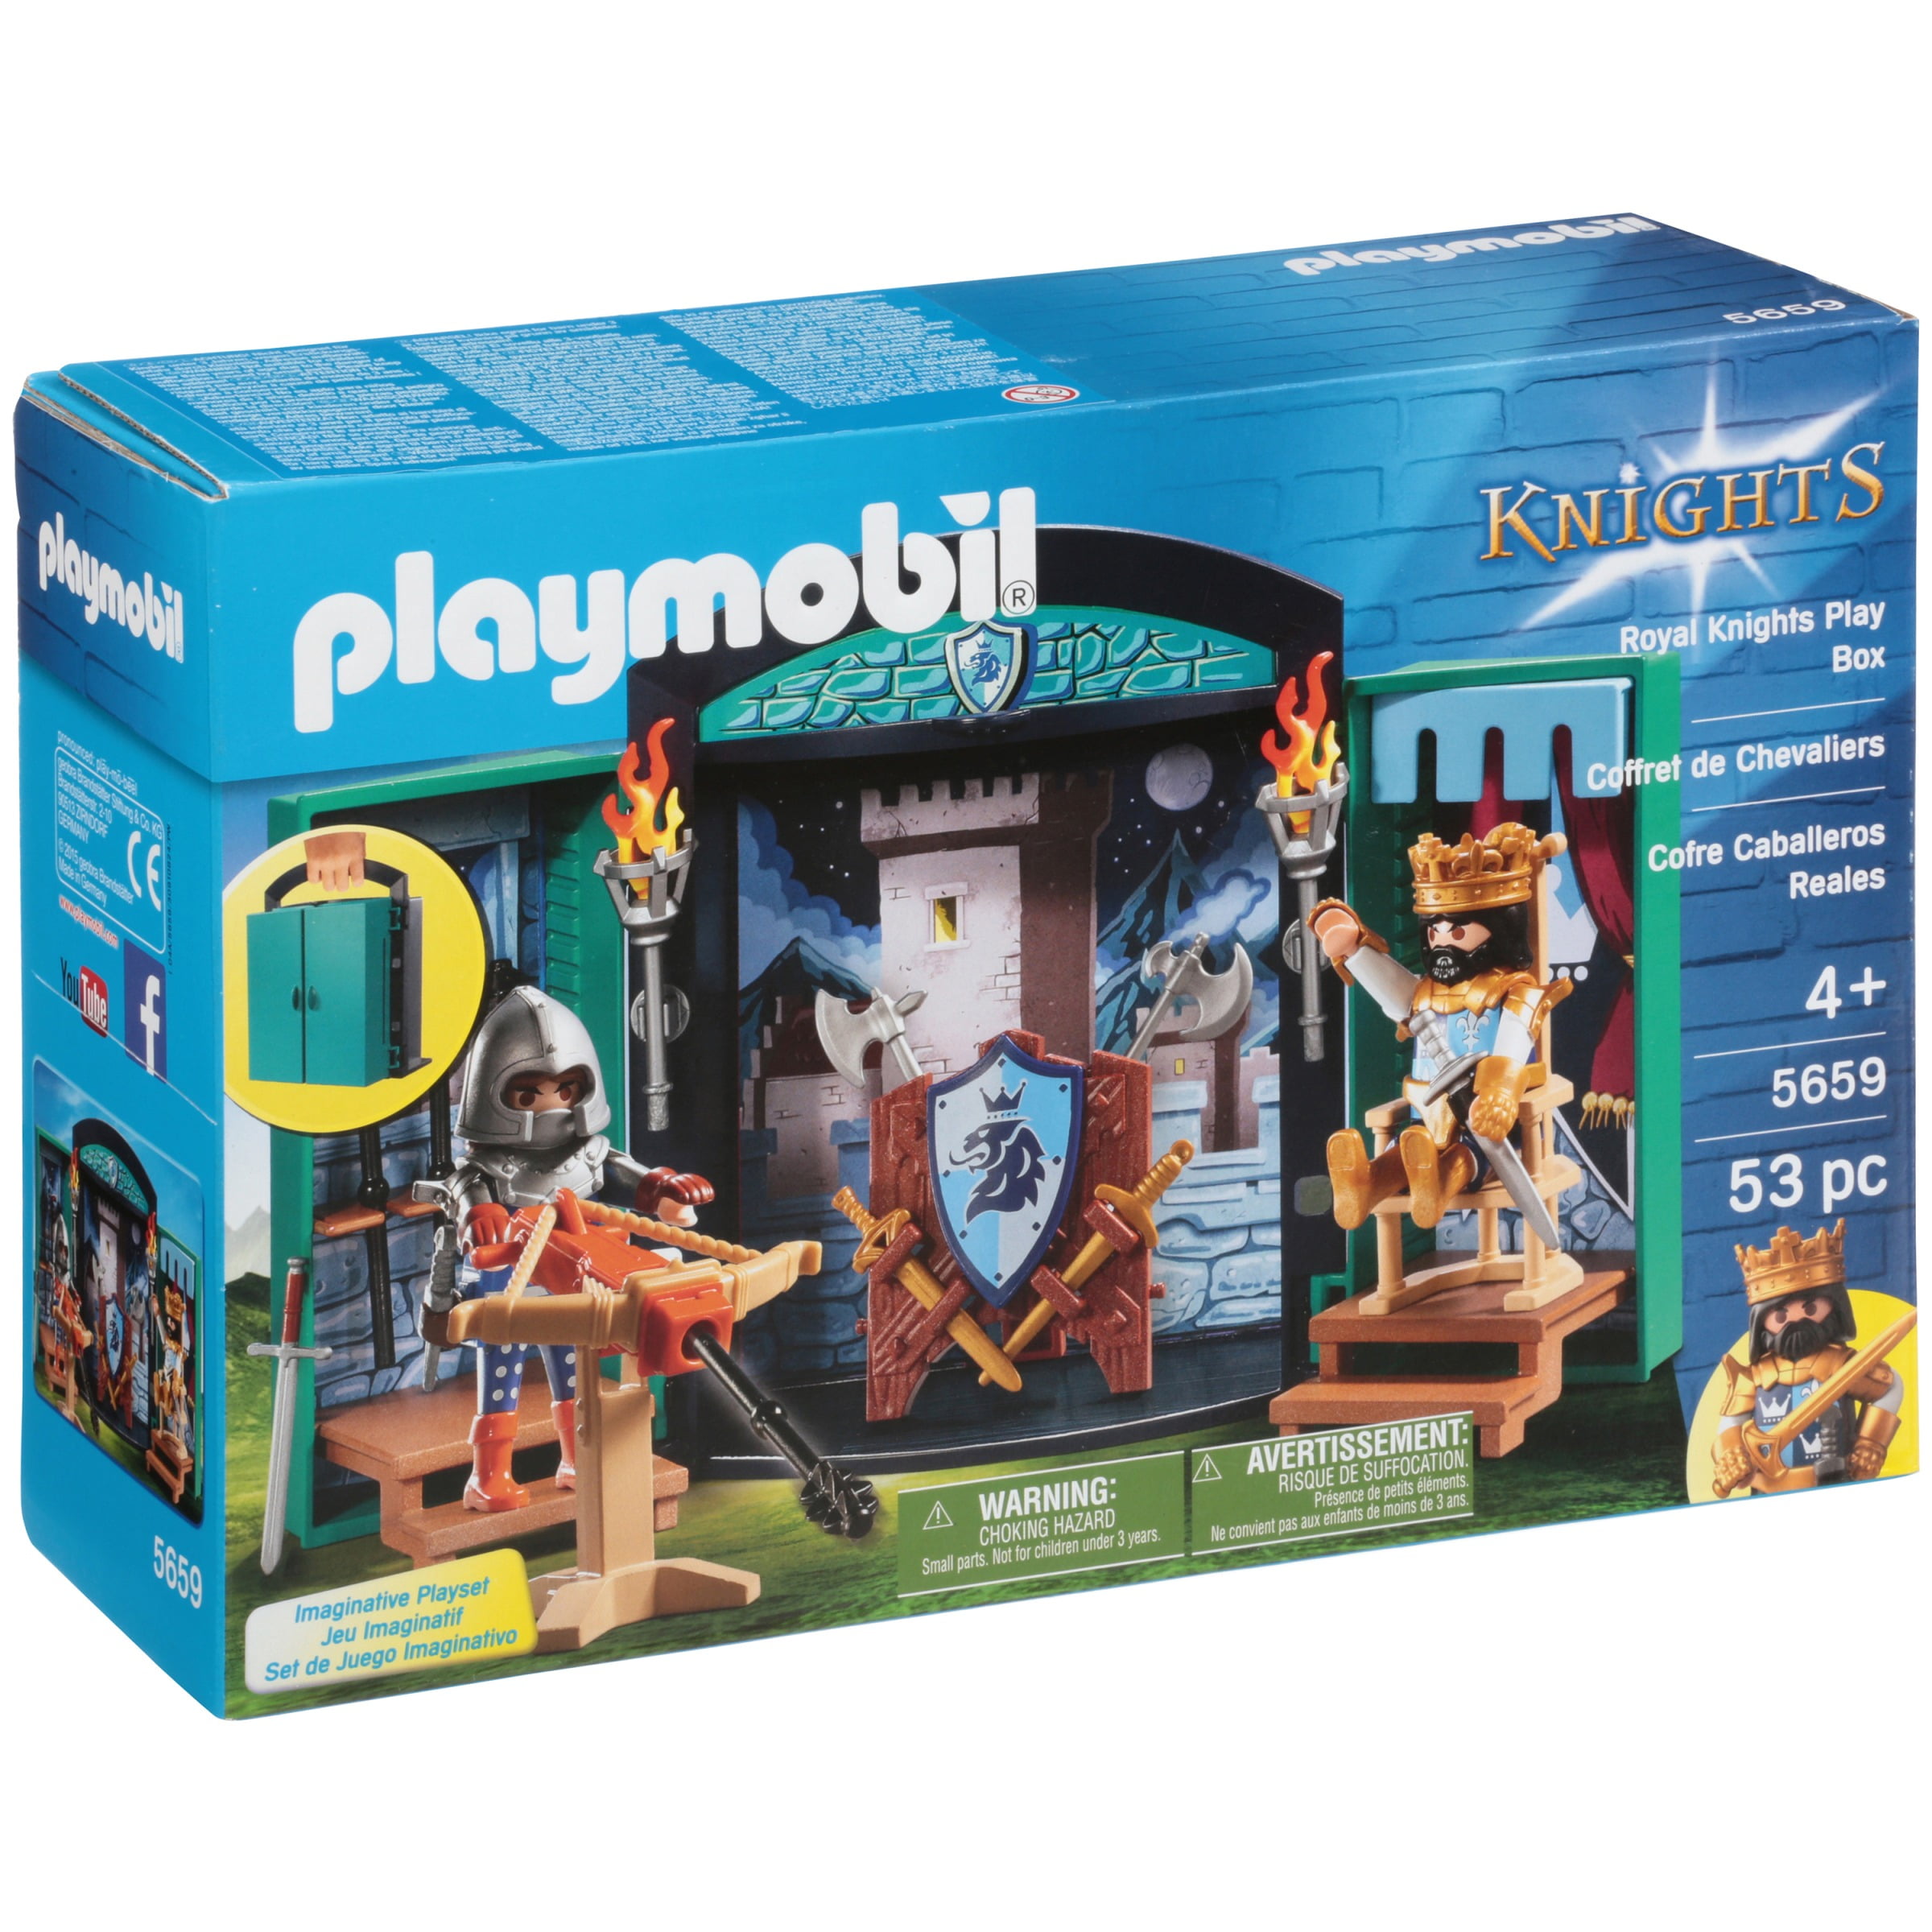 Details about   Playmobil knights to choose-new and original packaging show original title various set's 